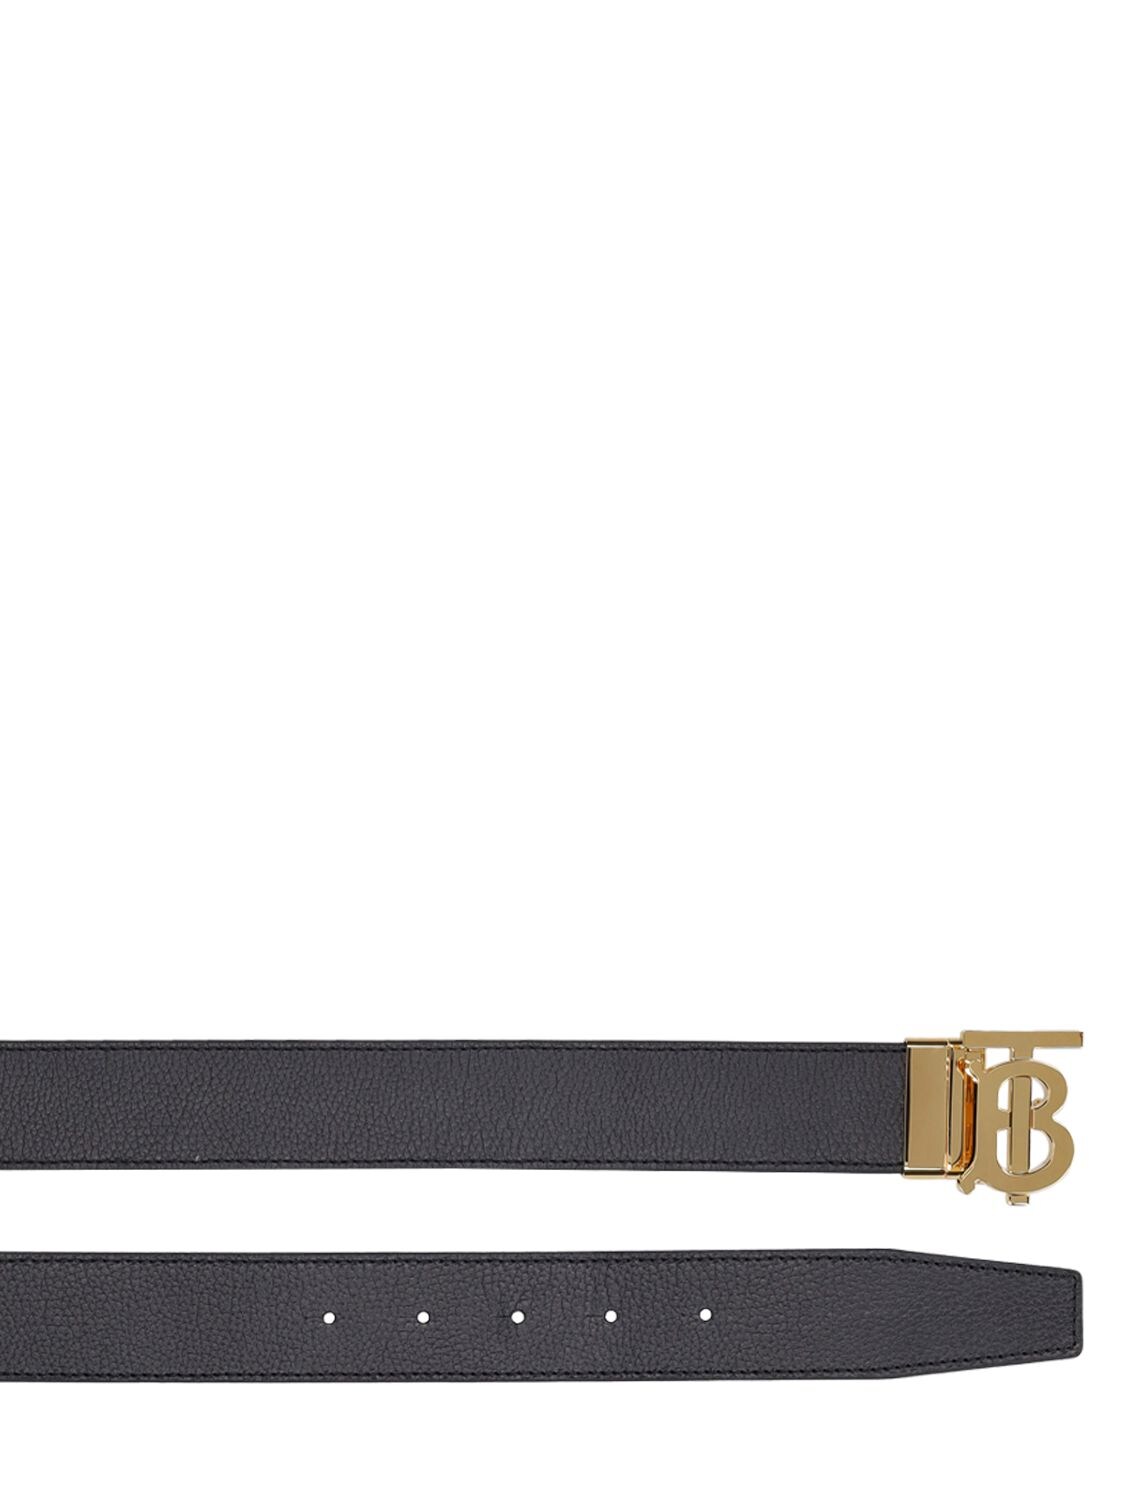 Shop Burberry 35mm Tb Grainy Leather Belt In Black,tan,gold